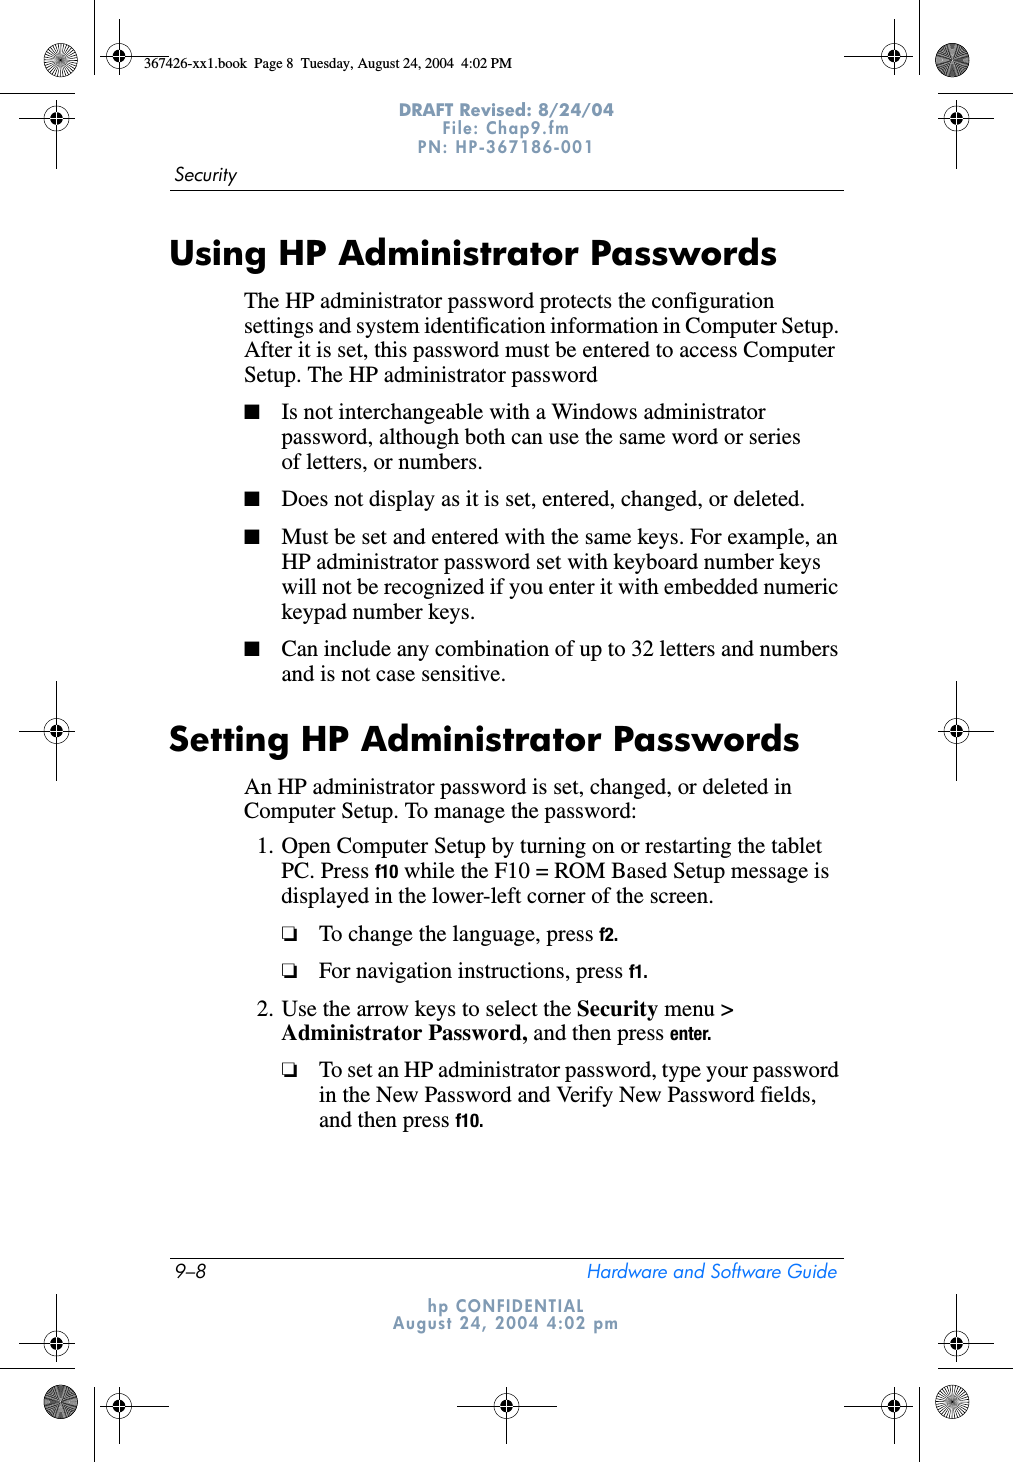 9–8 Hardware and Software GuideSecurityDRAFT Revised: 8/24/04File: Chap9.fm PN: HP-367186-001 hp CONFIDENTIALAugust 24, 2004 4:02 pmUsing HP Administrator PasswordsThe HP administrator password protects the configuration settings and system identification information in Computer Setup. After it is set, this password must be entered to access Computer Setup. The HP administrator password■Is not interchangeable with a Windows administrator password, although both can use the same word or series of letters, or numbers.■Does not display as it is set, entered, changed, or deleted.■Must be set and entered with the same keys. For example, an HP administrator password set with keyboard number keys will not be recognized if you enter it with embedded numeric keypad number keys.■Can include any combination of up to 32 letters and numbers and is not case sensitive.Setting HP Administrator PasswordsAn HP administrator password is set, changed, or deleted in Computer Setup. To manage the password:1. Open Computer Setup by turning on or restarting the tablet PC. Press f10 while the F10 = ROM Based Setup message is displayed in the lower-left corner of the screen.❏To change the language, press f2.❏For navigation instructions, press f1.2. Use the arrow keys to select the Security menu &gt; Administrator Password, and then press enter.❏To set an HP administrator password, type your password in the New Password and Verify New Password fields, and then press f10.367426-xx1.book  Page 8  Tuesday, August 24, 2004  4:02 PM